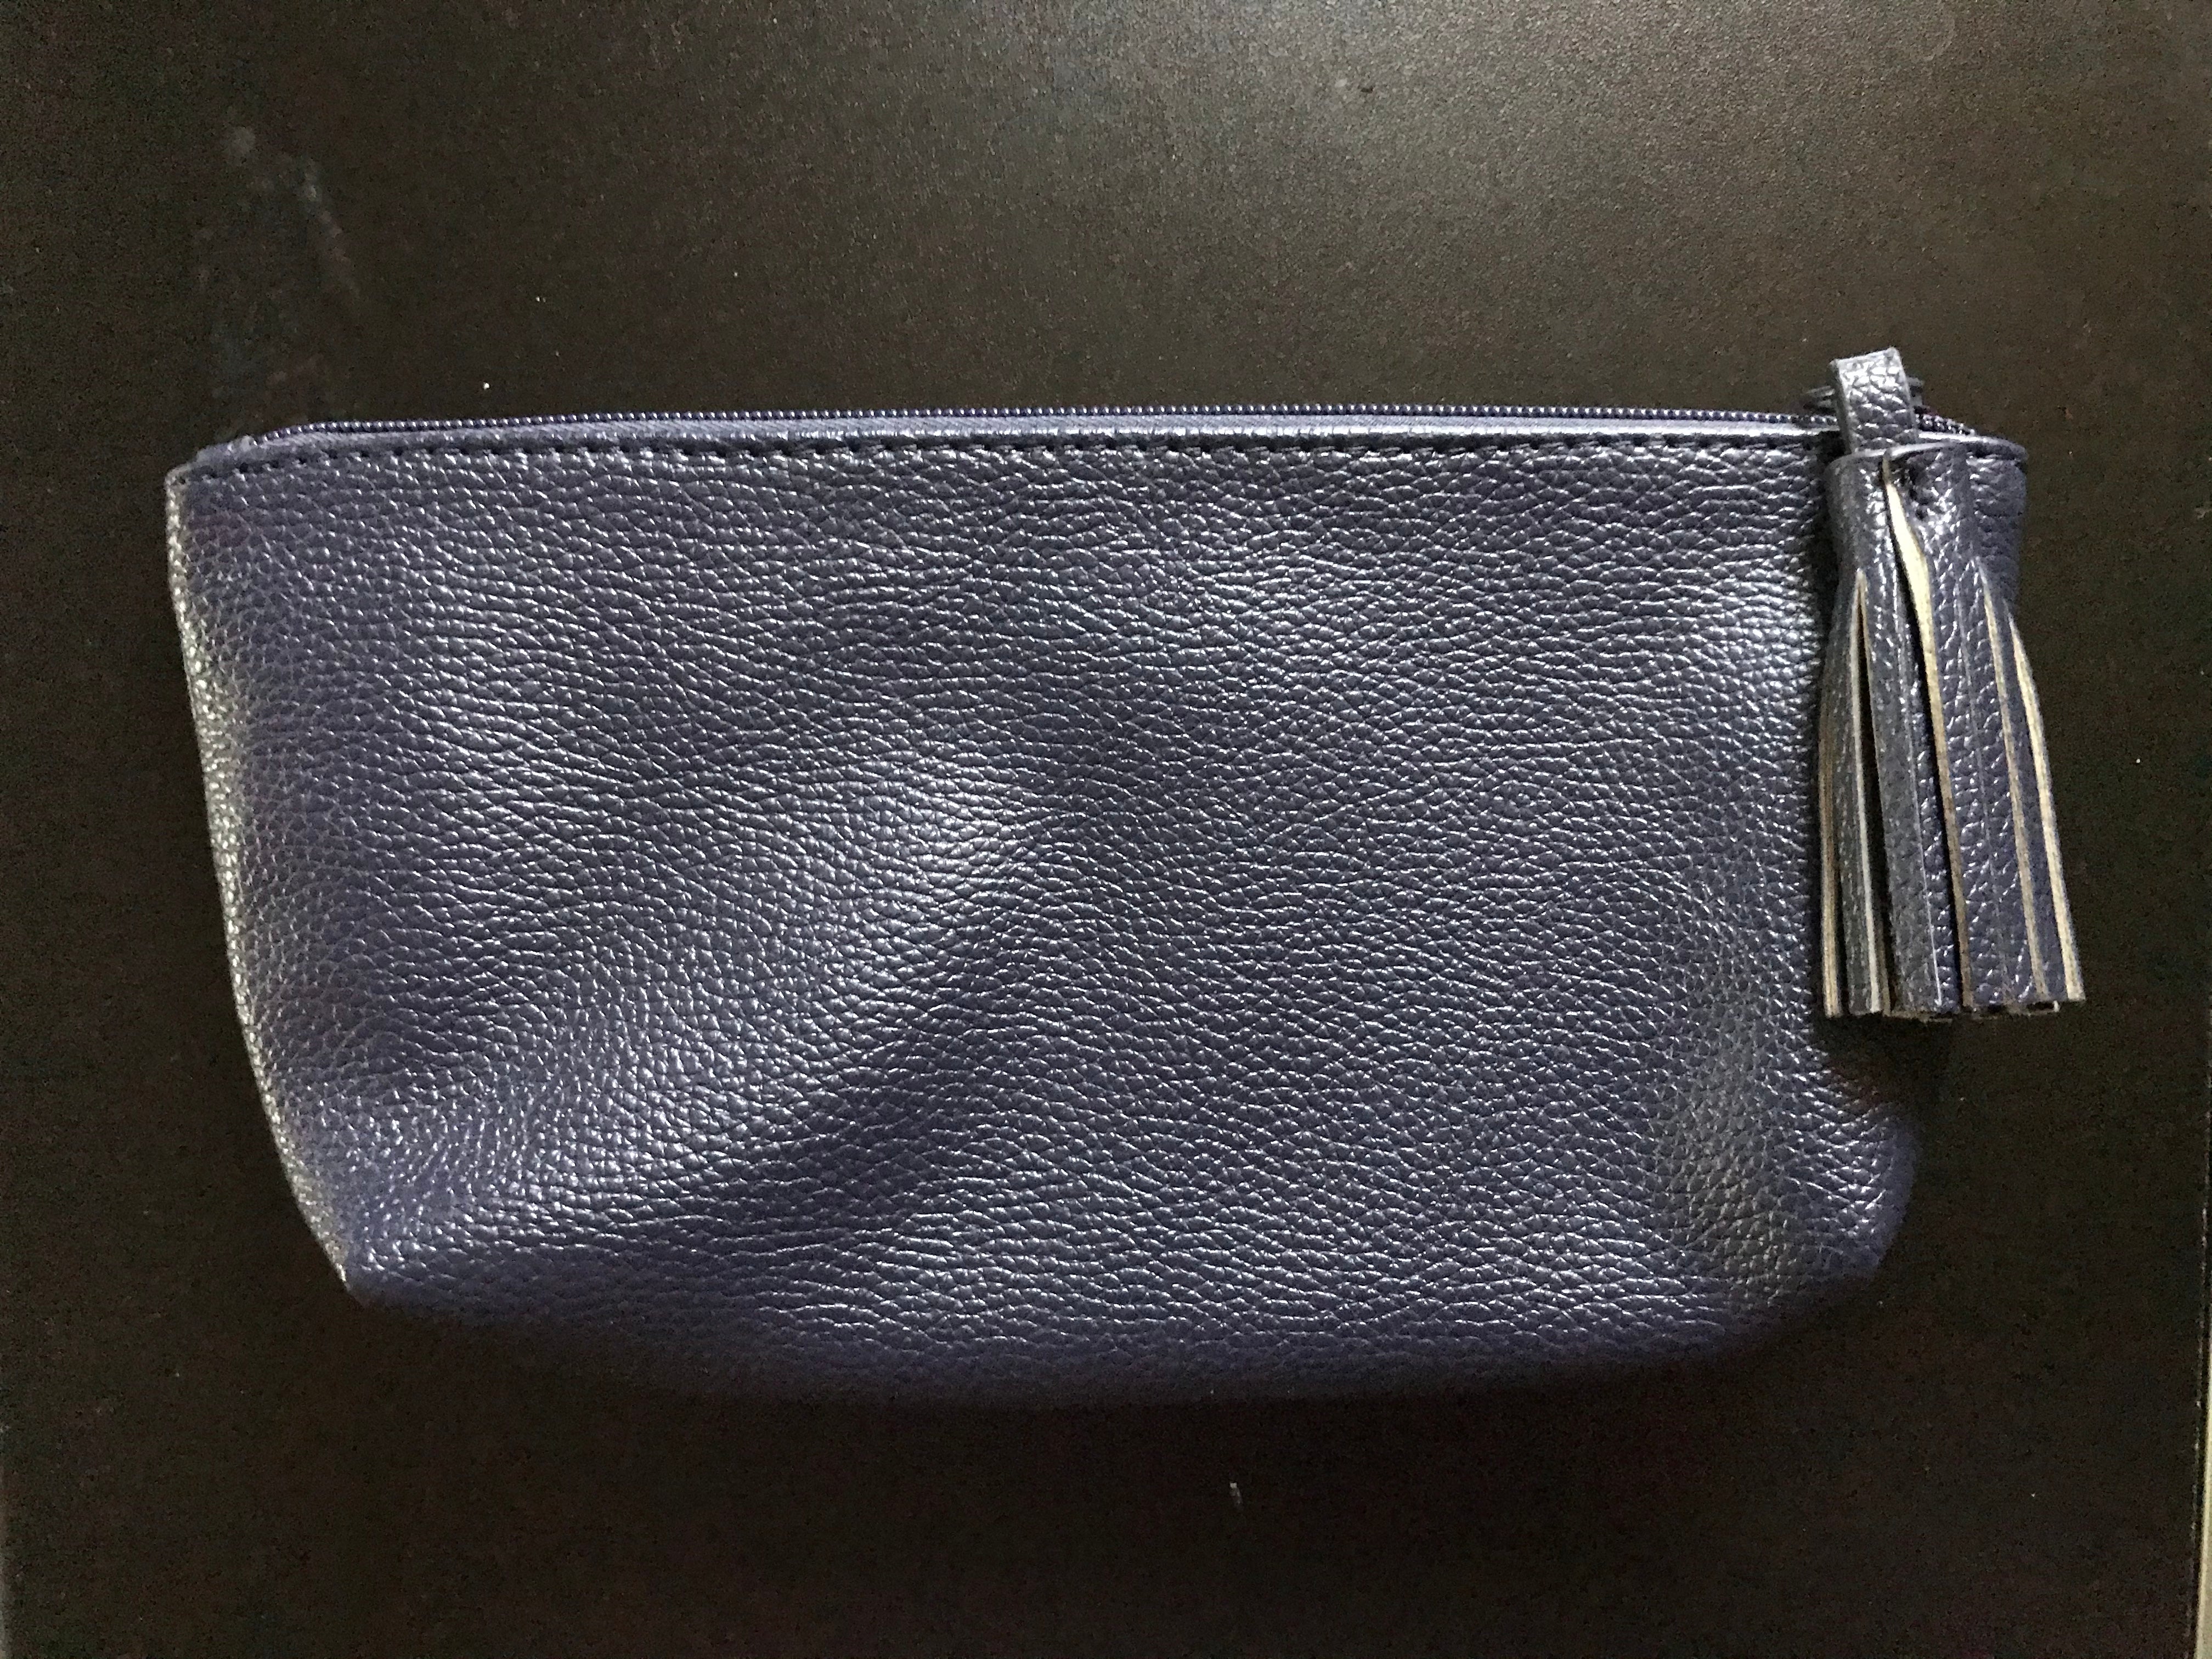 Neiman Marcus Blue Faux Leather Makeup Cosmetic Clutch Bag